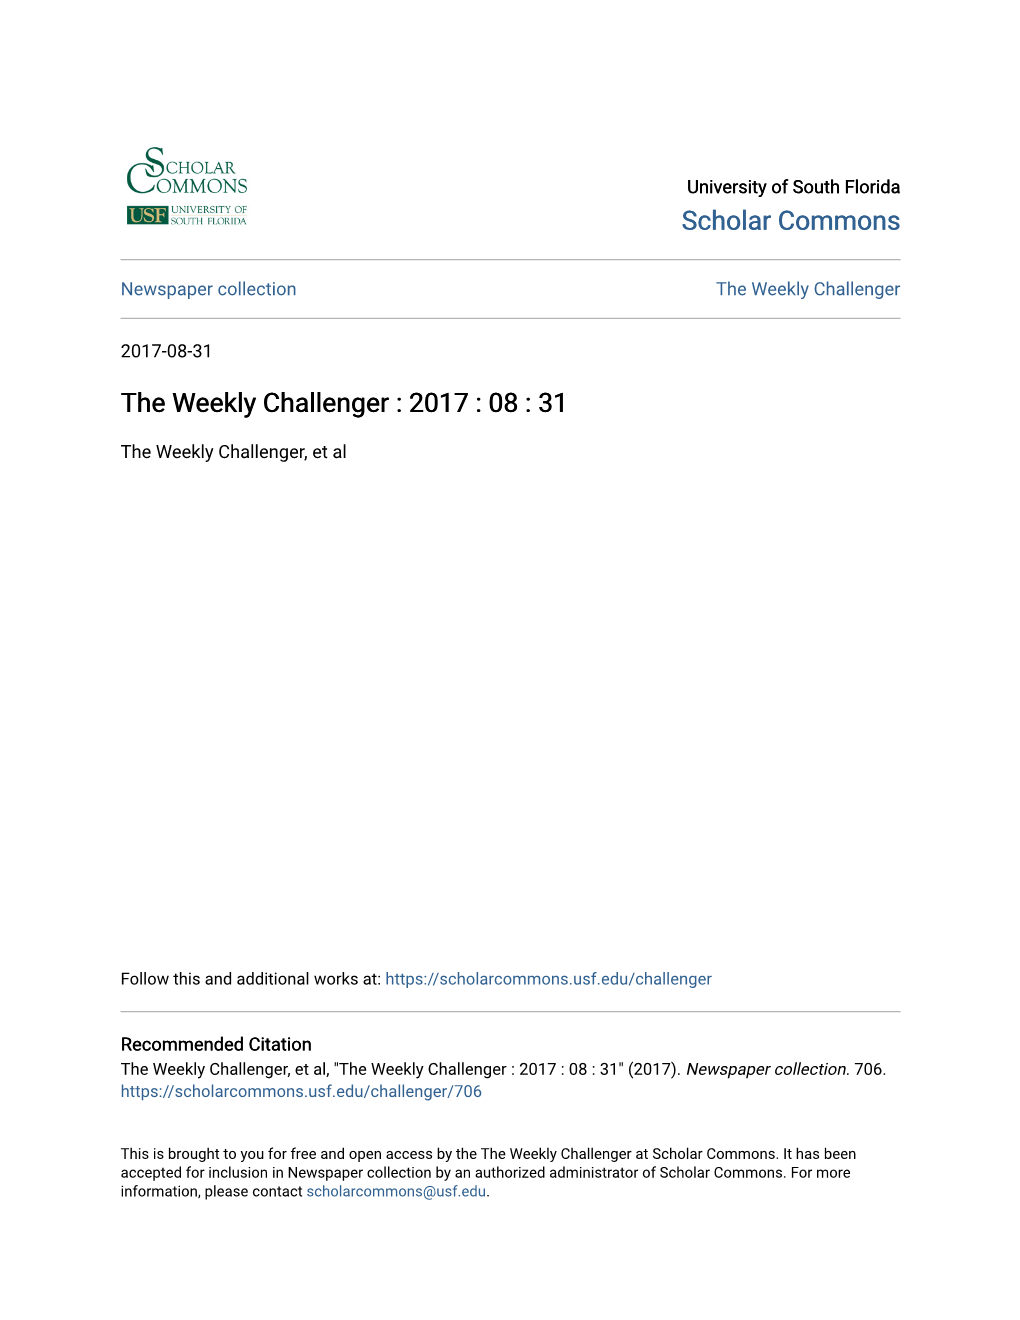 The Weekly Challenger : 2017 : 08 : 31